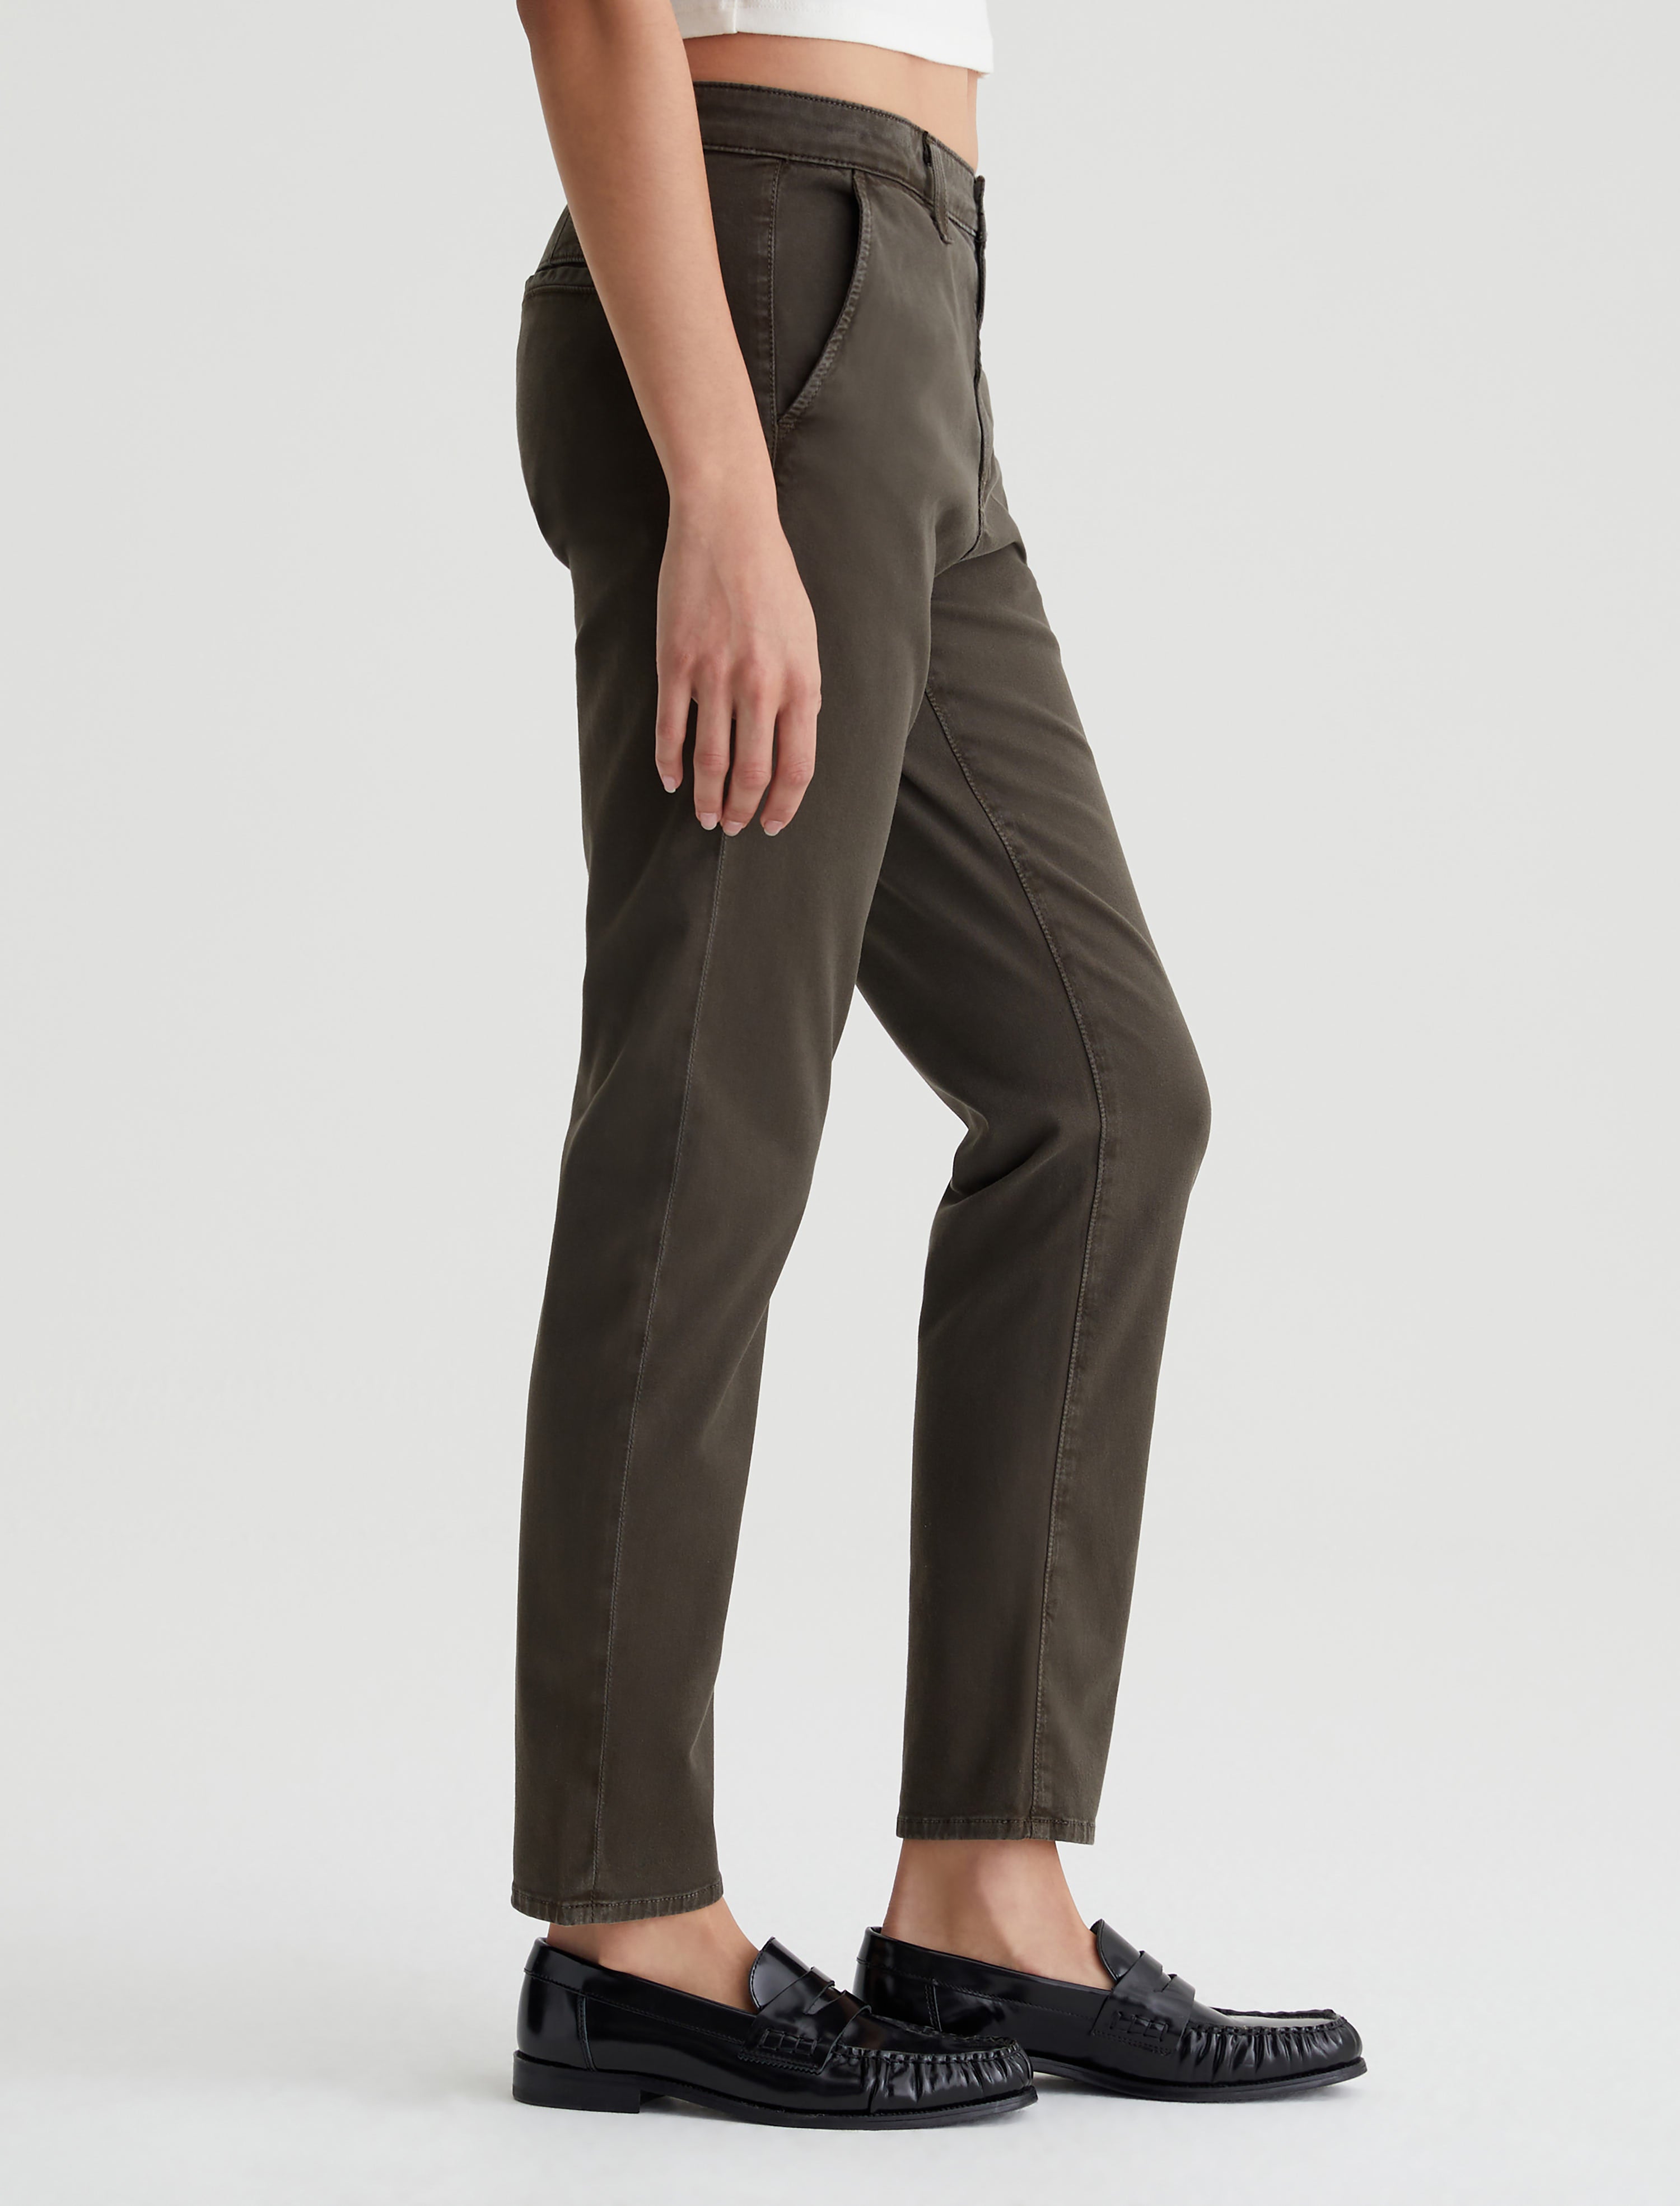 Olive skinny pants for women to flex those good vibes | Le Réussi